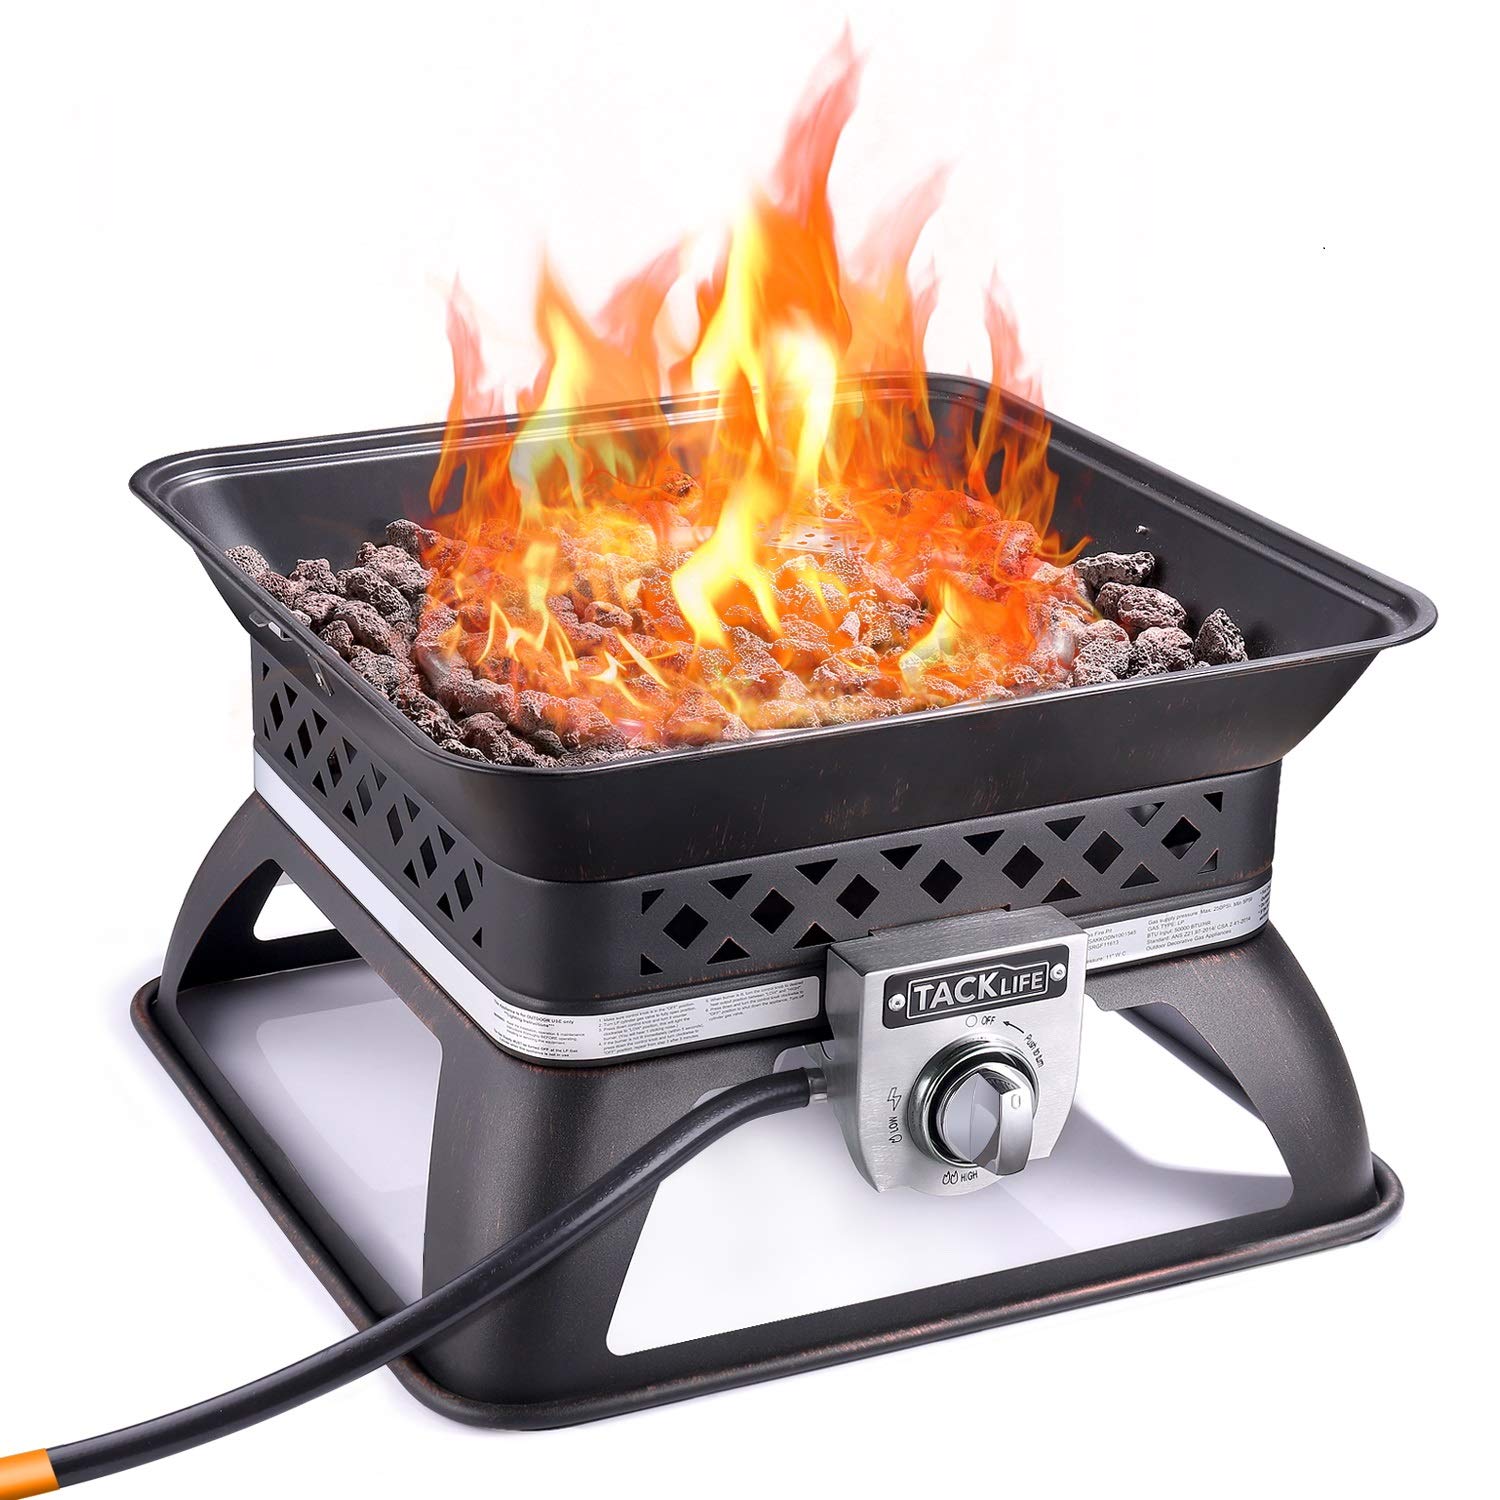 Top 10 Best Portable Propane Gas Fire Pit | Best RV Reviews